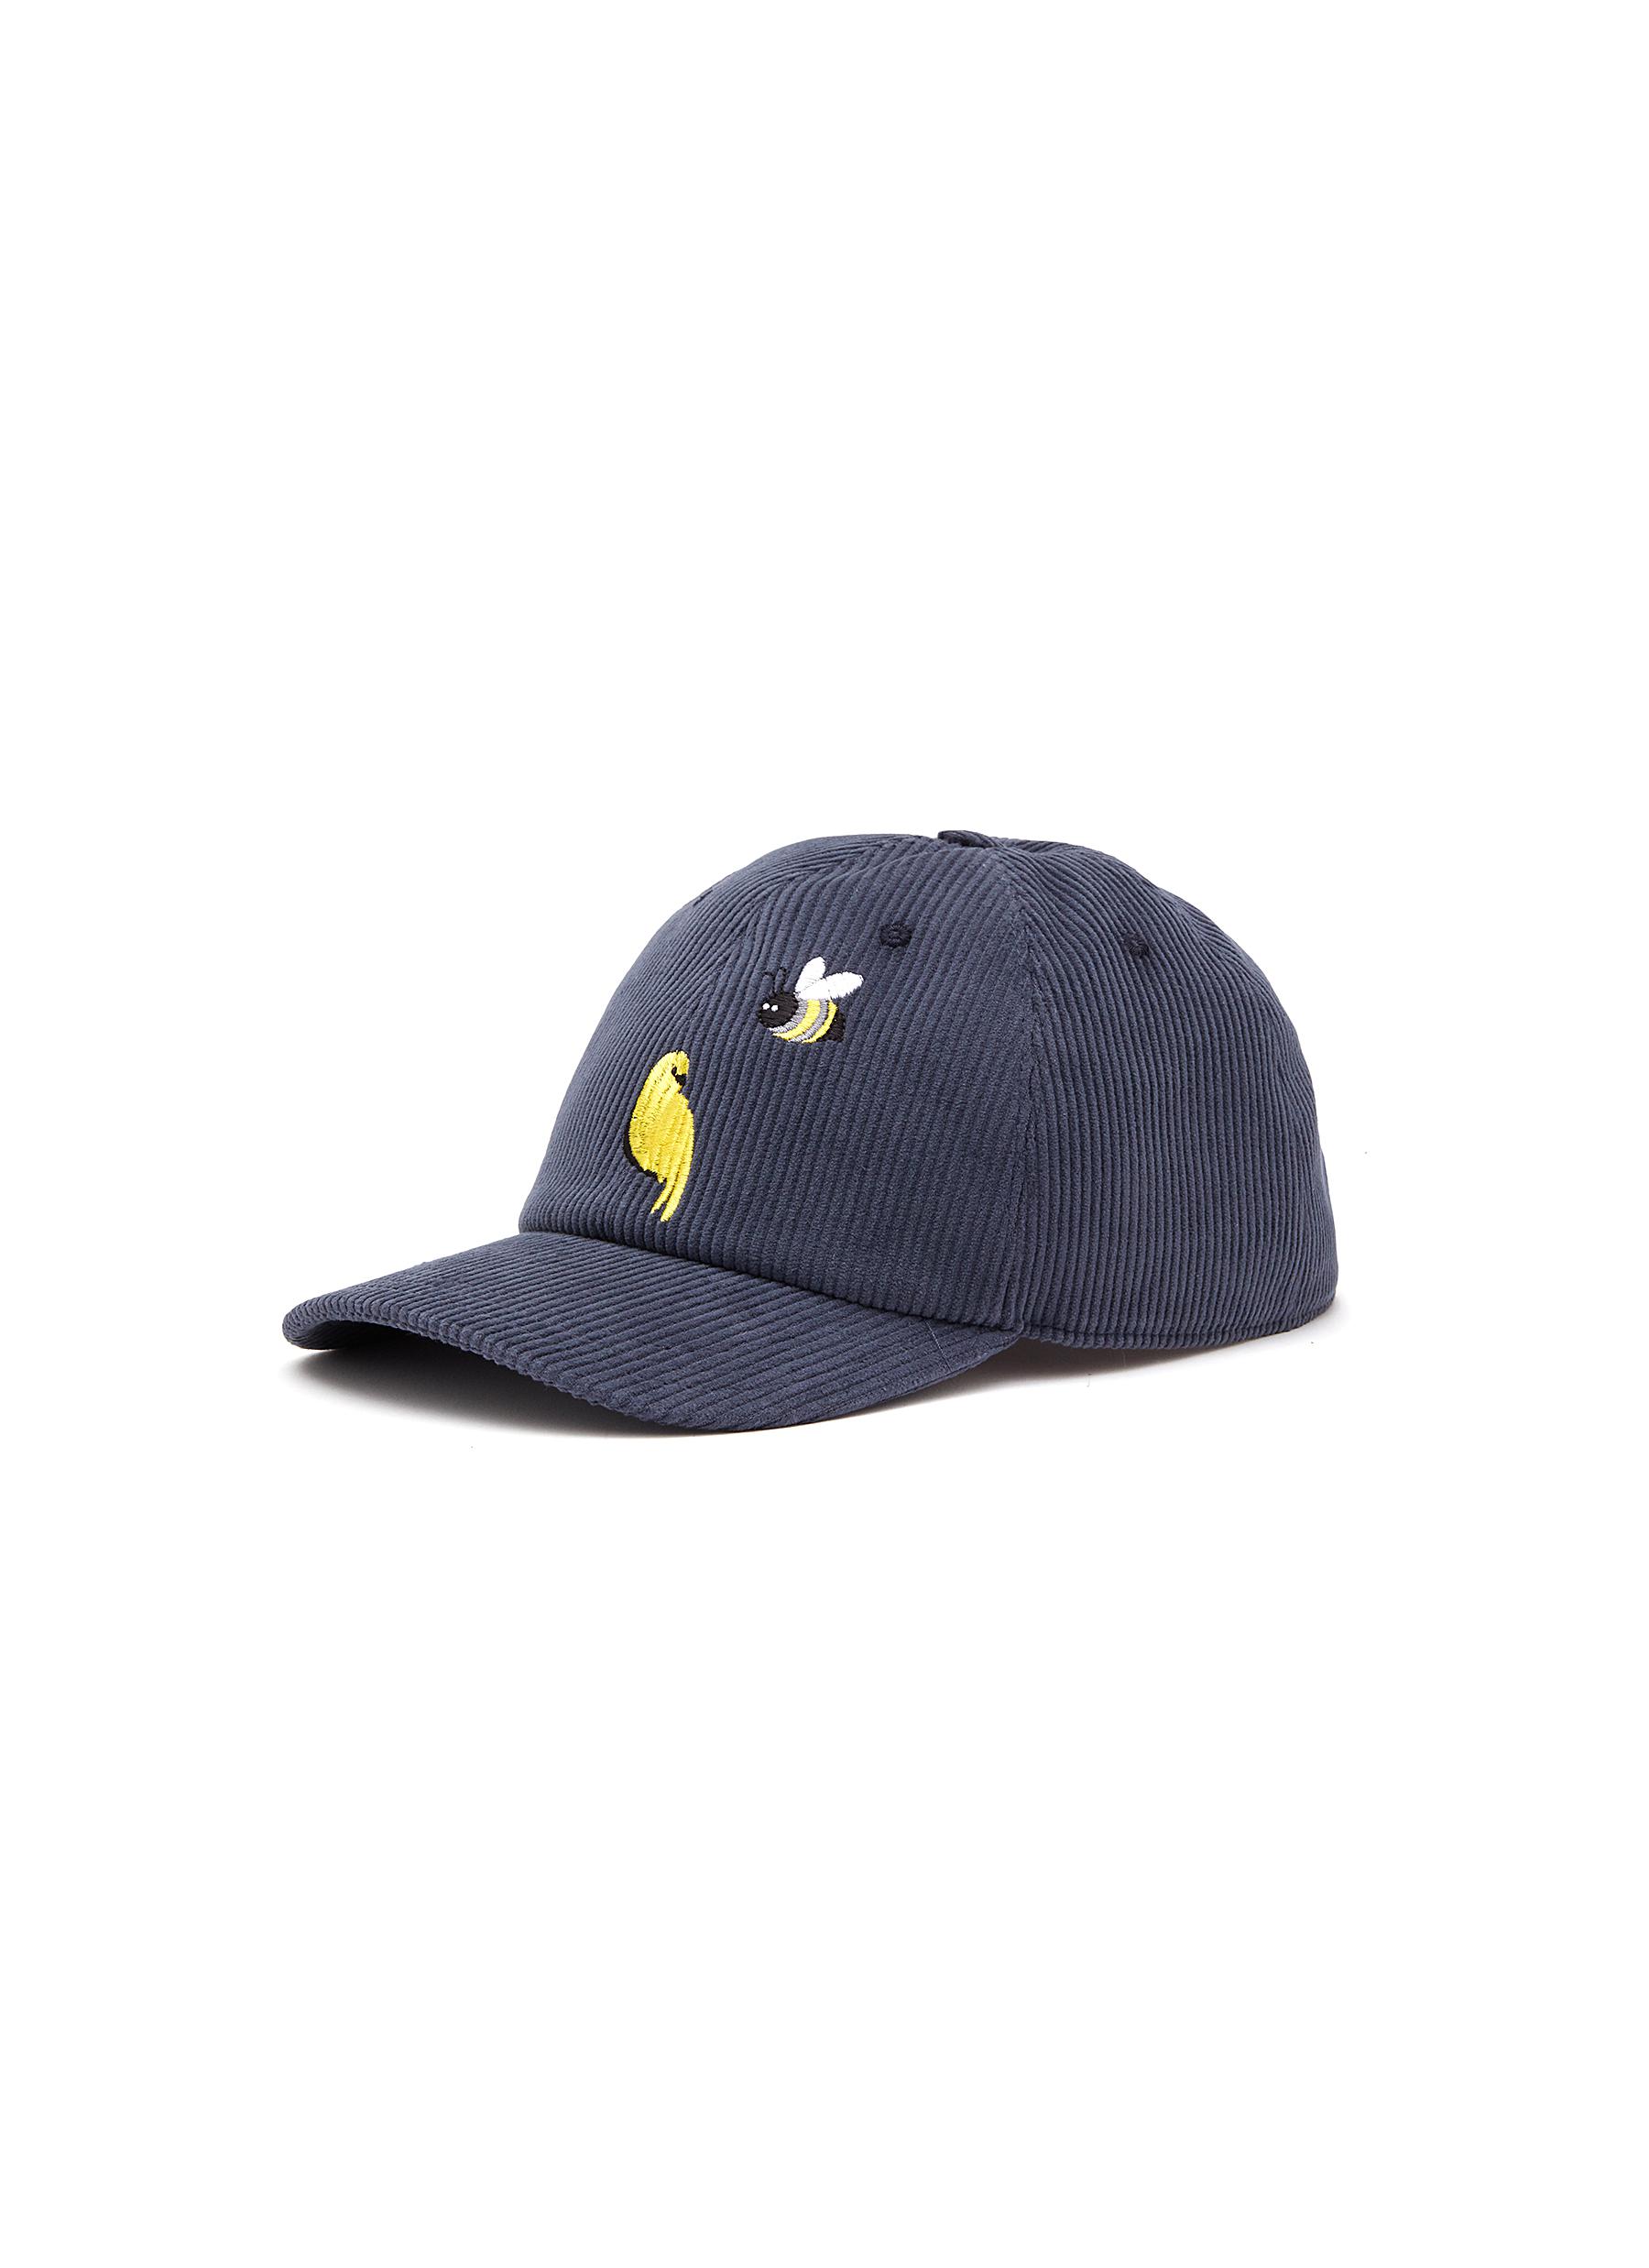 THOM BROWNE BIRDS AND BEES EMBROIDERY 6 PANEL BASEBALL CAP